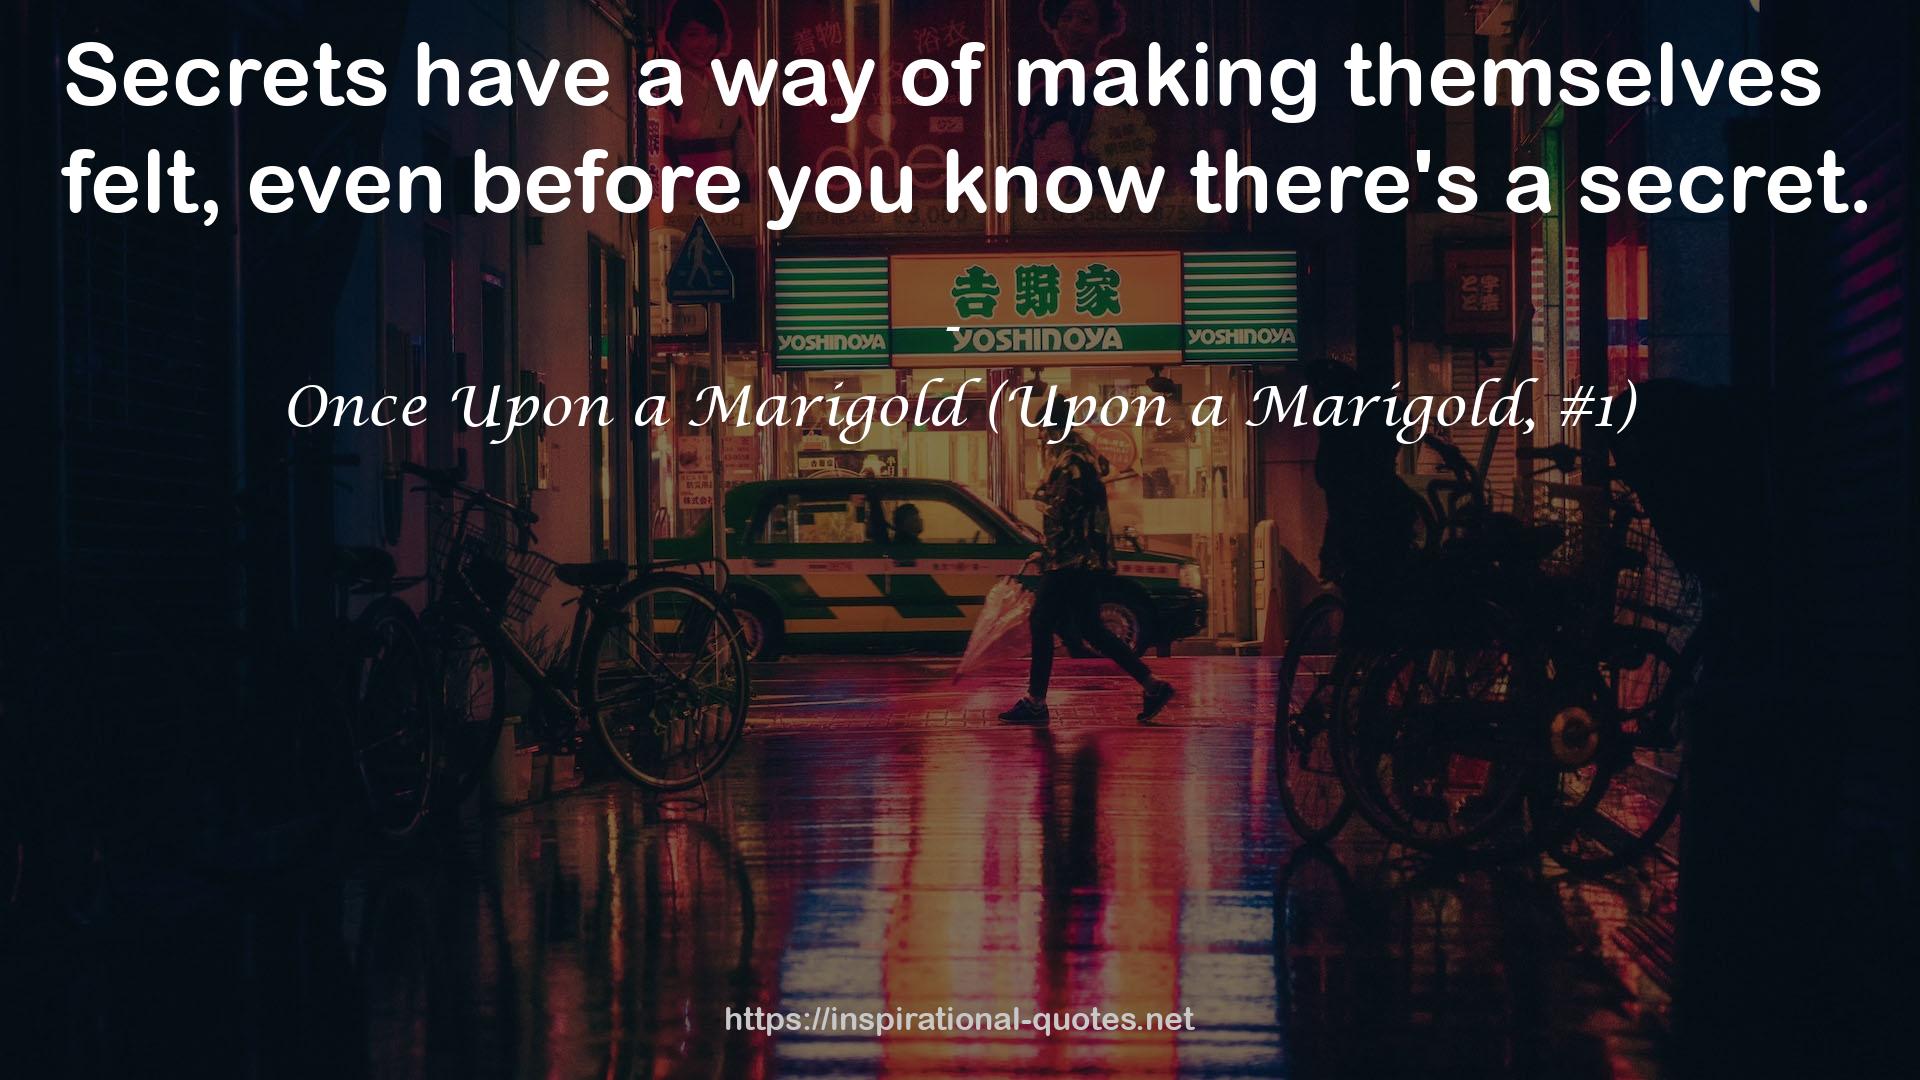 Once Upon a Marigold (Upon a Marigold, #1) QUOTES